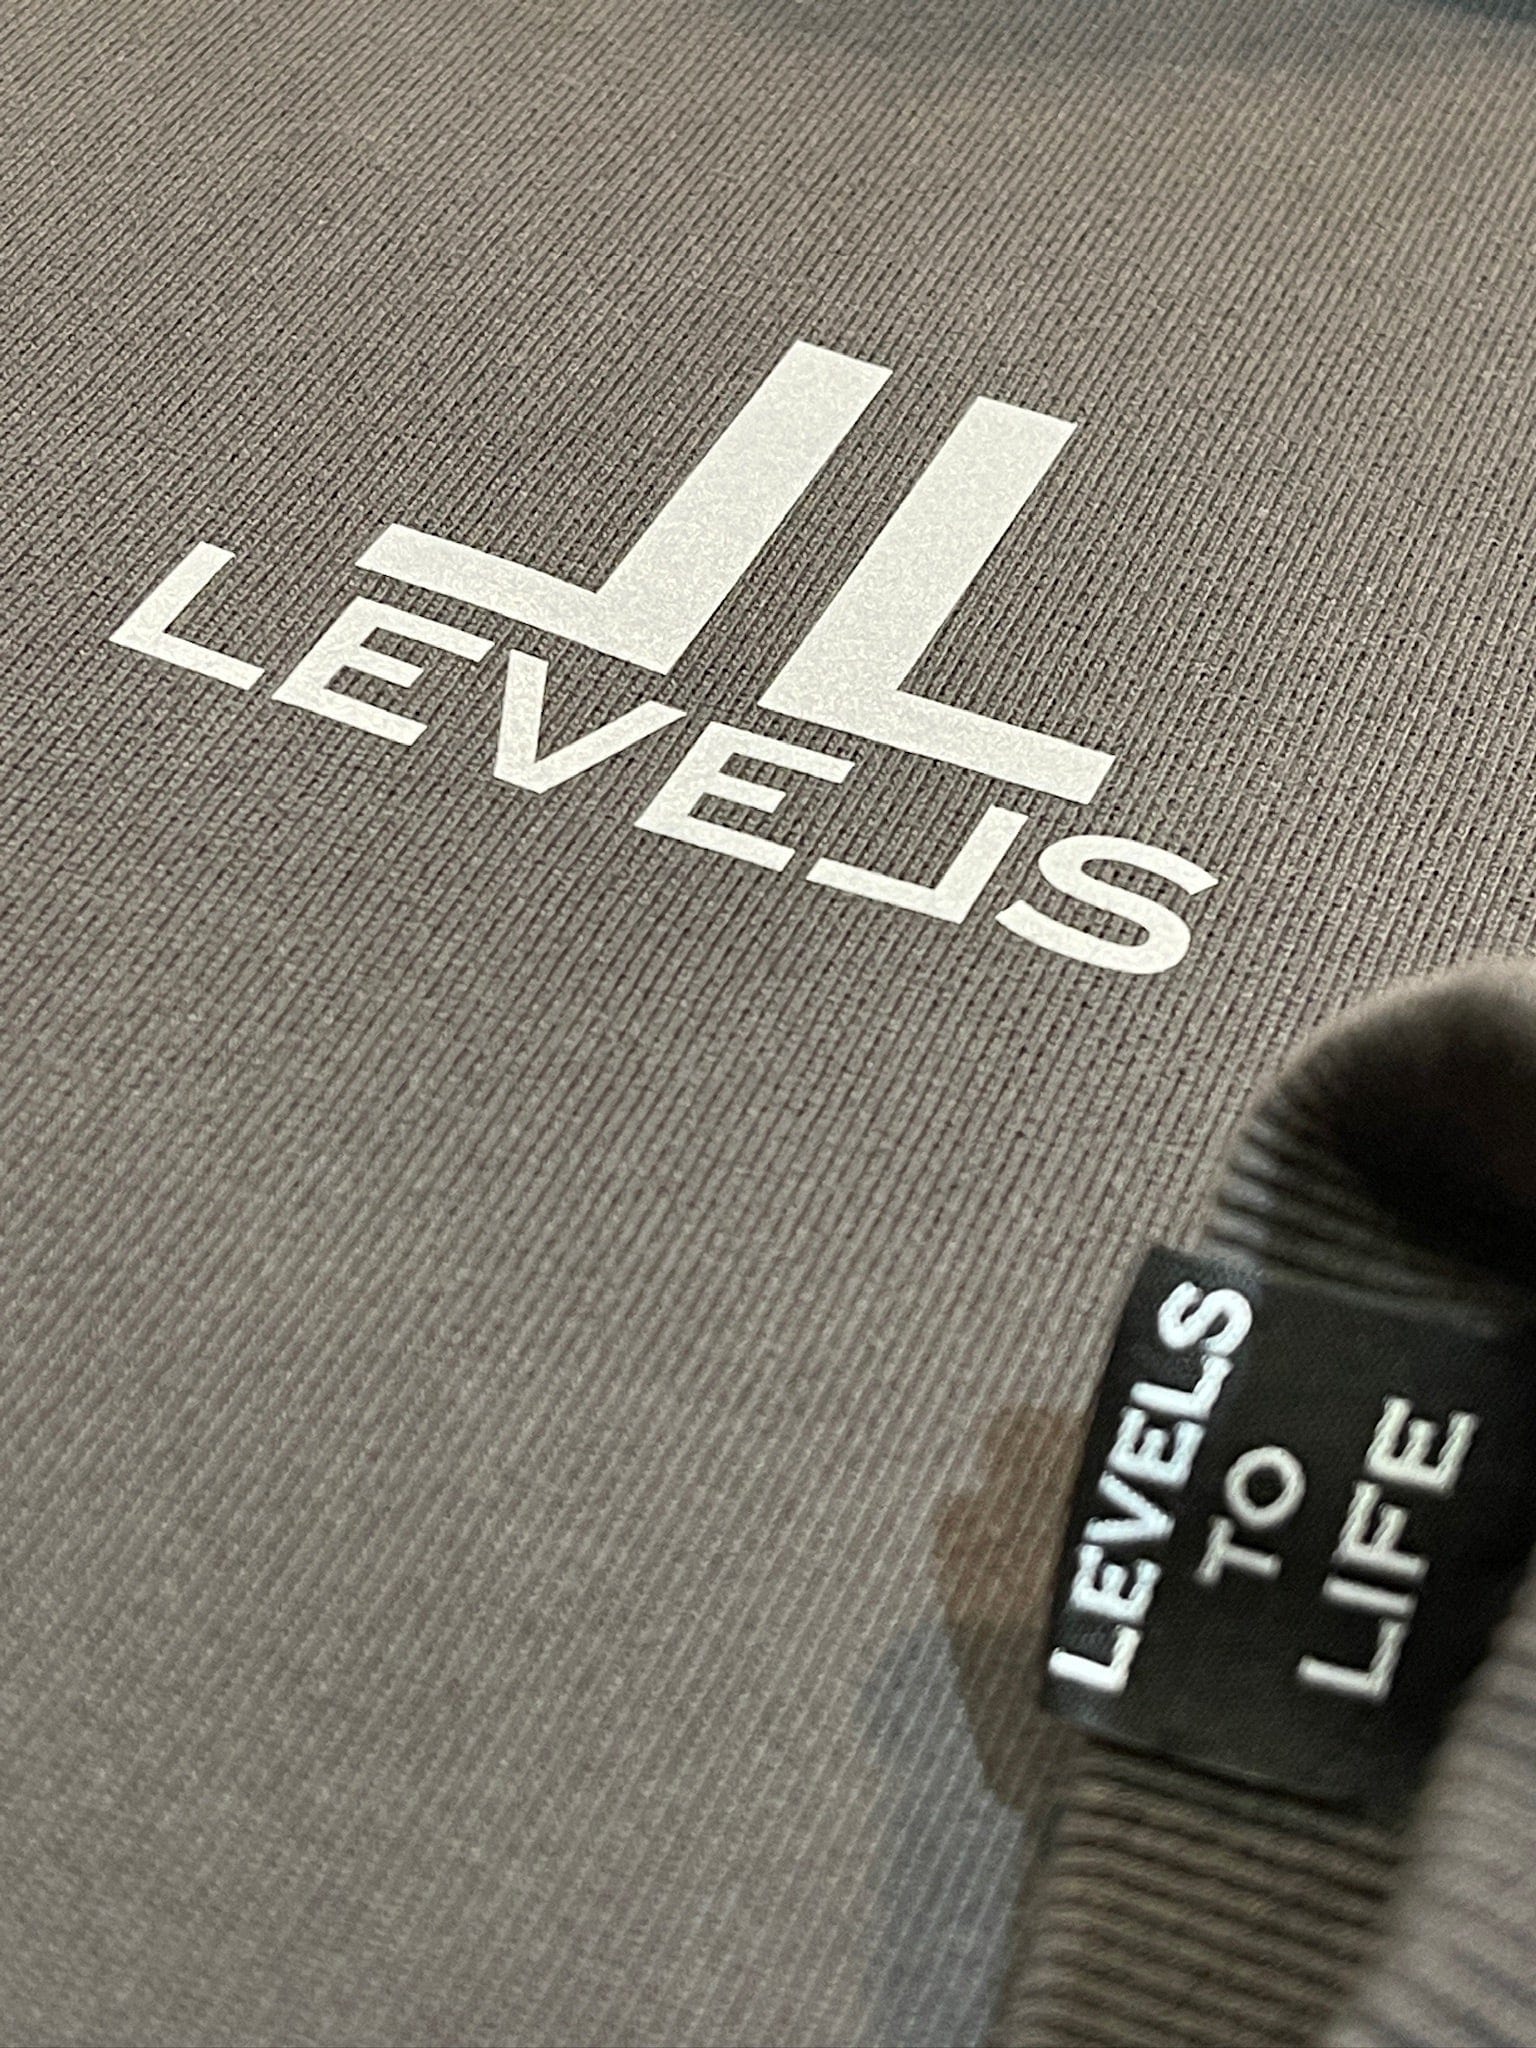 LEVELS, LLC Apparel & Accessories LUXE LEVELS OVERSIZED HOODIE  |DIAMOND JOY COLLECTION